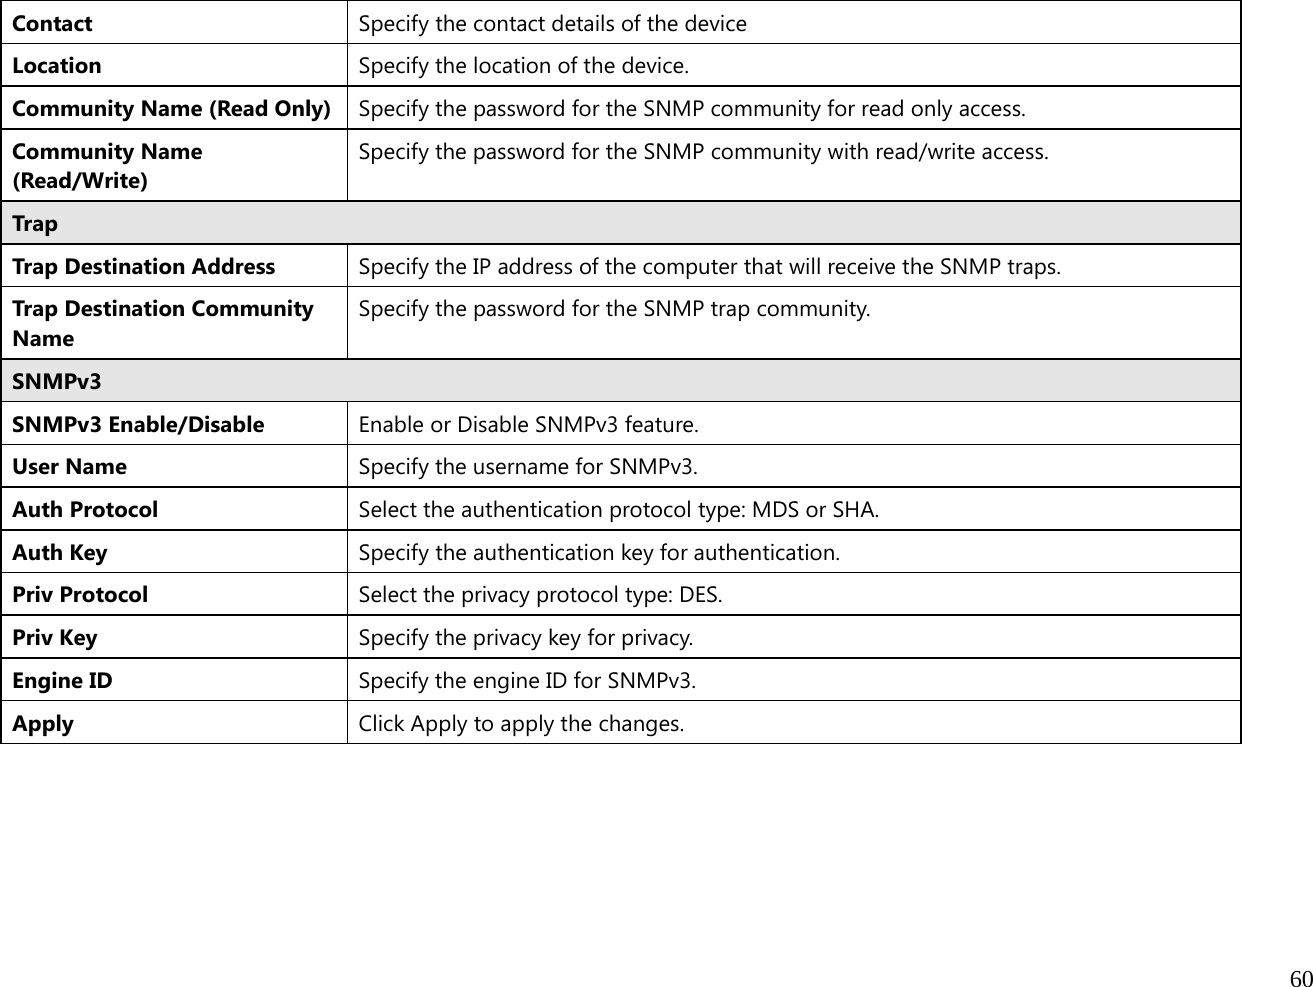  60  Contact  Specify the contact details of the device Location Specify the location of the device.Community Name (Read Only) Specify the password for the SNMP community for read only access. Community Name (Read/Write) Specify the password for the SNMP community with read/write access. Trap Trap Destination Address  Specify the IP address of the computer that will receive the SNMP traps. Trap Destination Community Name Specify the password for the SNMP trap community.SNMPv3 SNMPv3 Enable/Disable  Enable or Disable SNMPv3 feature.User Name  Specify the username for SNMPv3. Auth Protocol  Select the authentication protocol type: MDS or SHA. Auth Key Specify the authentication key for authentication.Priv Protocol  Select the privacy protocol type: DES. Priv Key  Specify the privacy key for privacy. Engine ID Specify the engine ID for SNMPv3.Apply  Click Apply to apply the changes.  